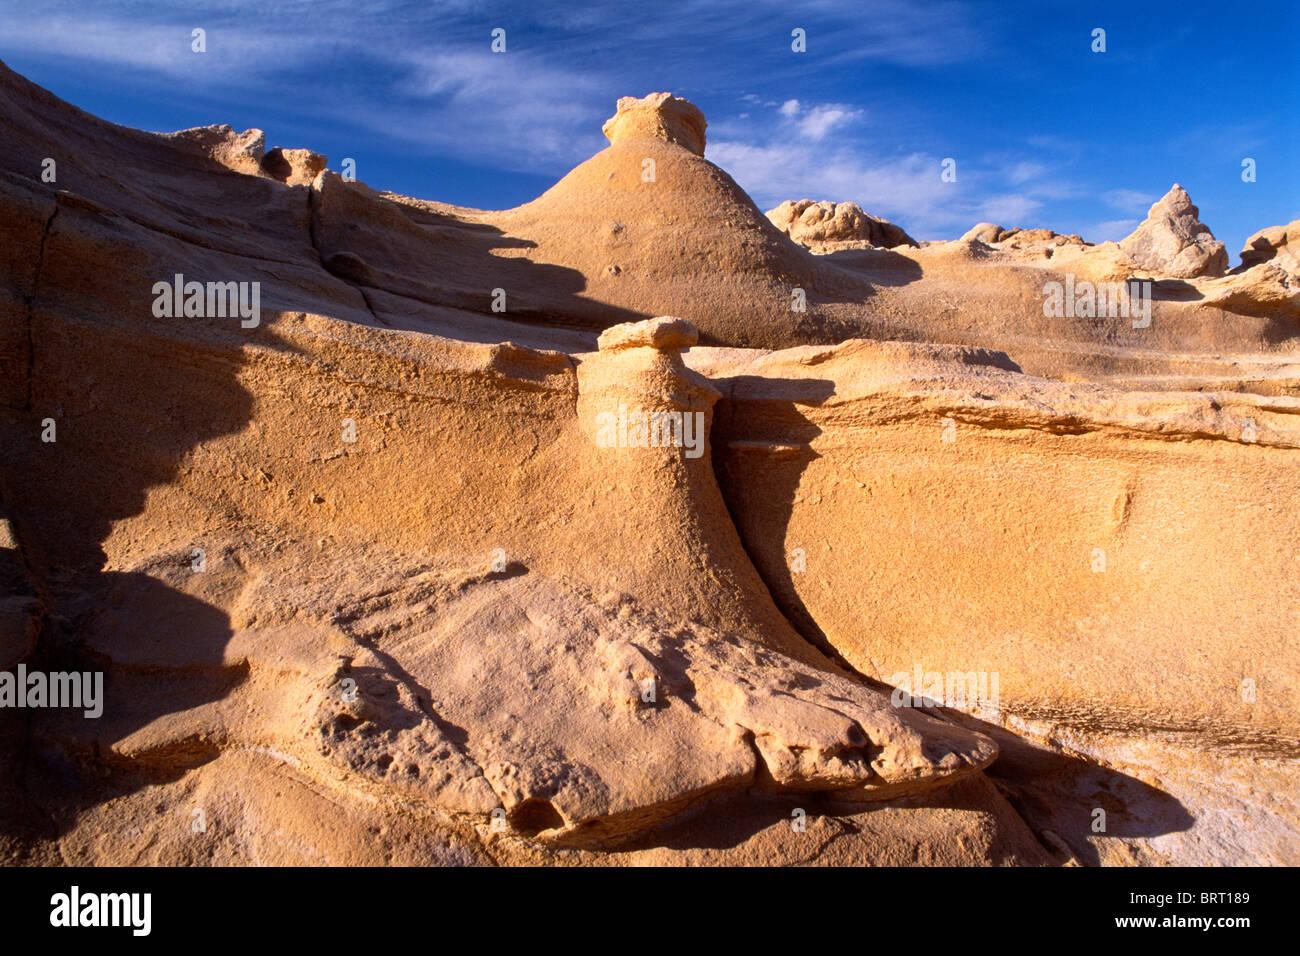 Sandstone structures in the Cabo de Gata-Níjar Natural Park, Almeria, Andalusia, Spain, Europe Stock Photo